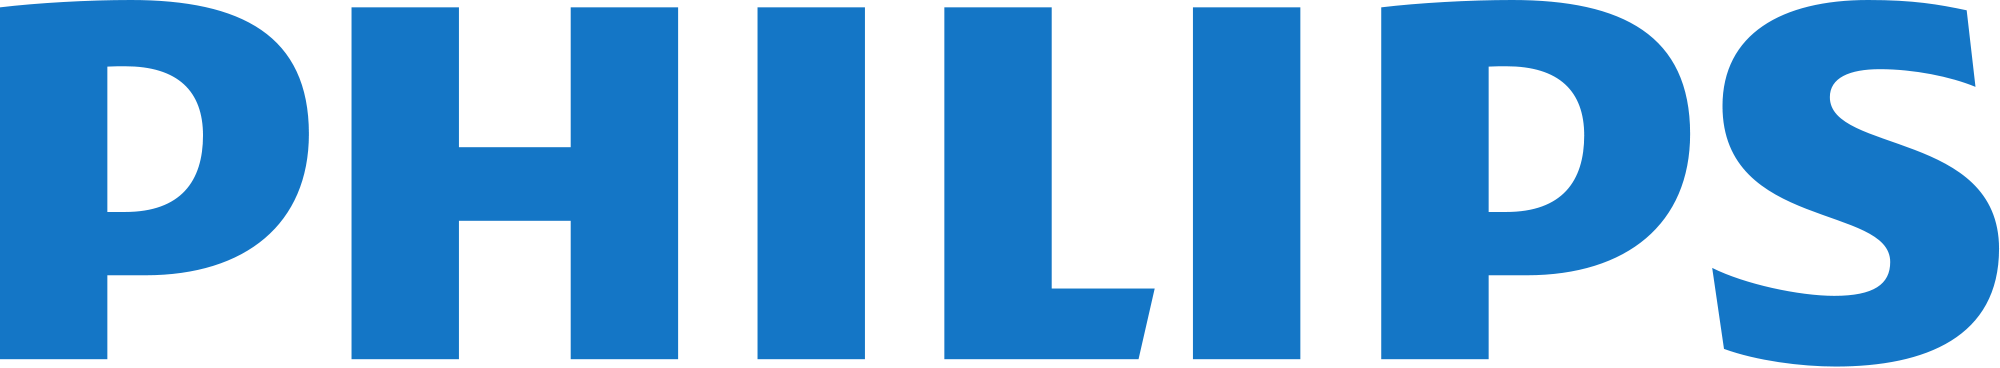 Philips_logo.png